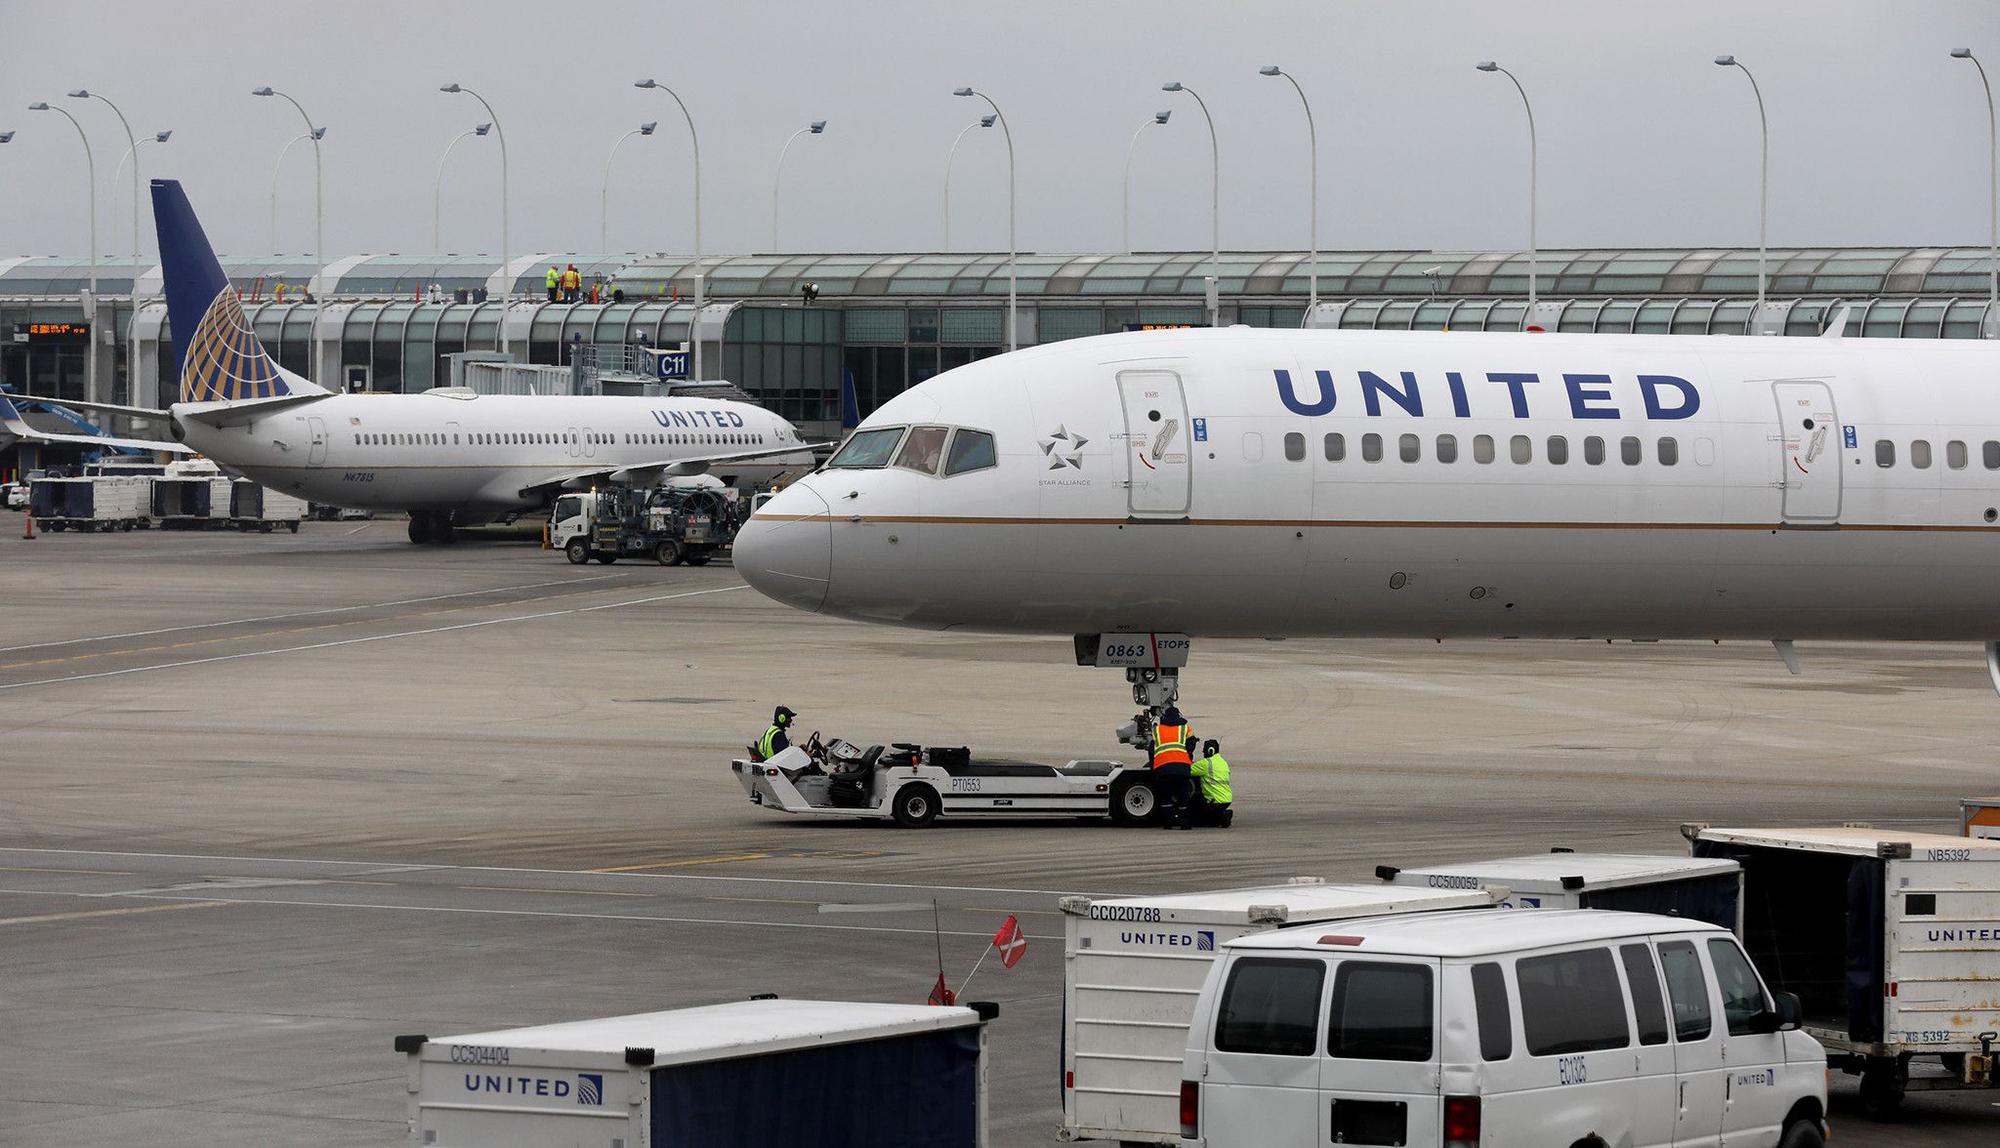 “Security Issue” Diverts United Airlines’ Newark-LAX Flight to Chicago